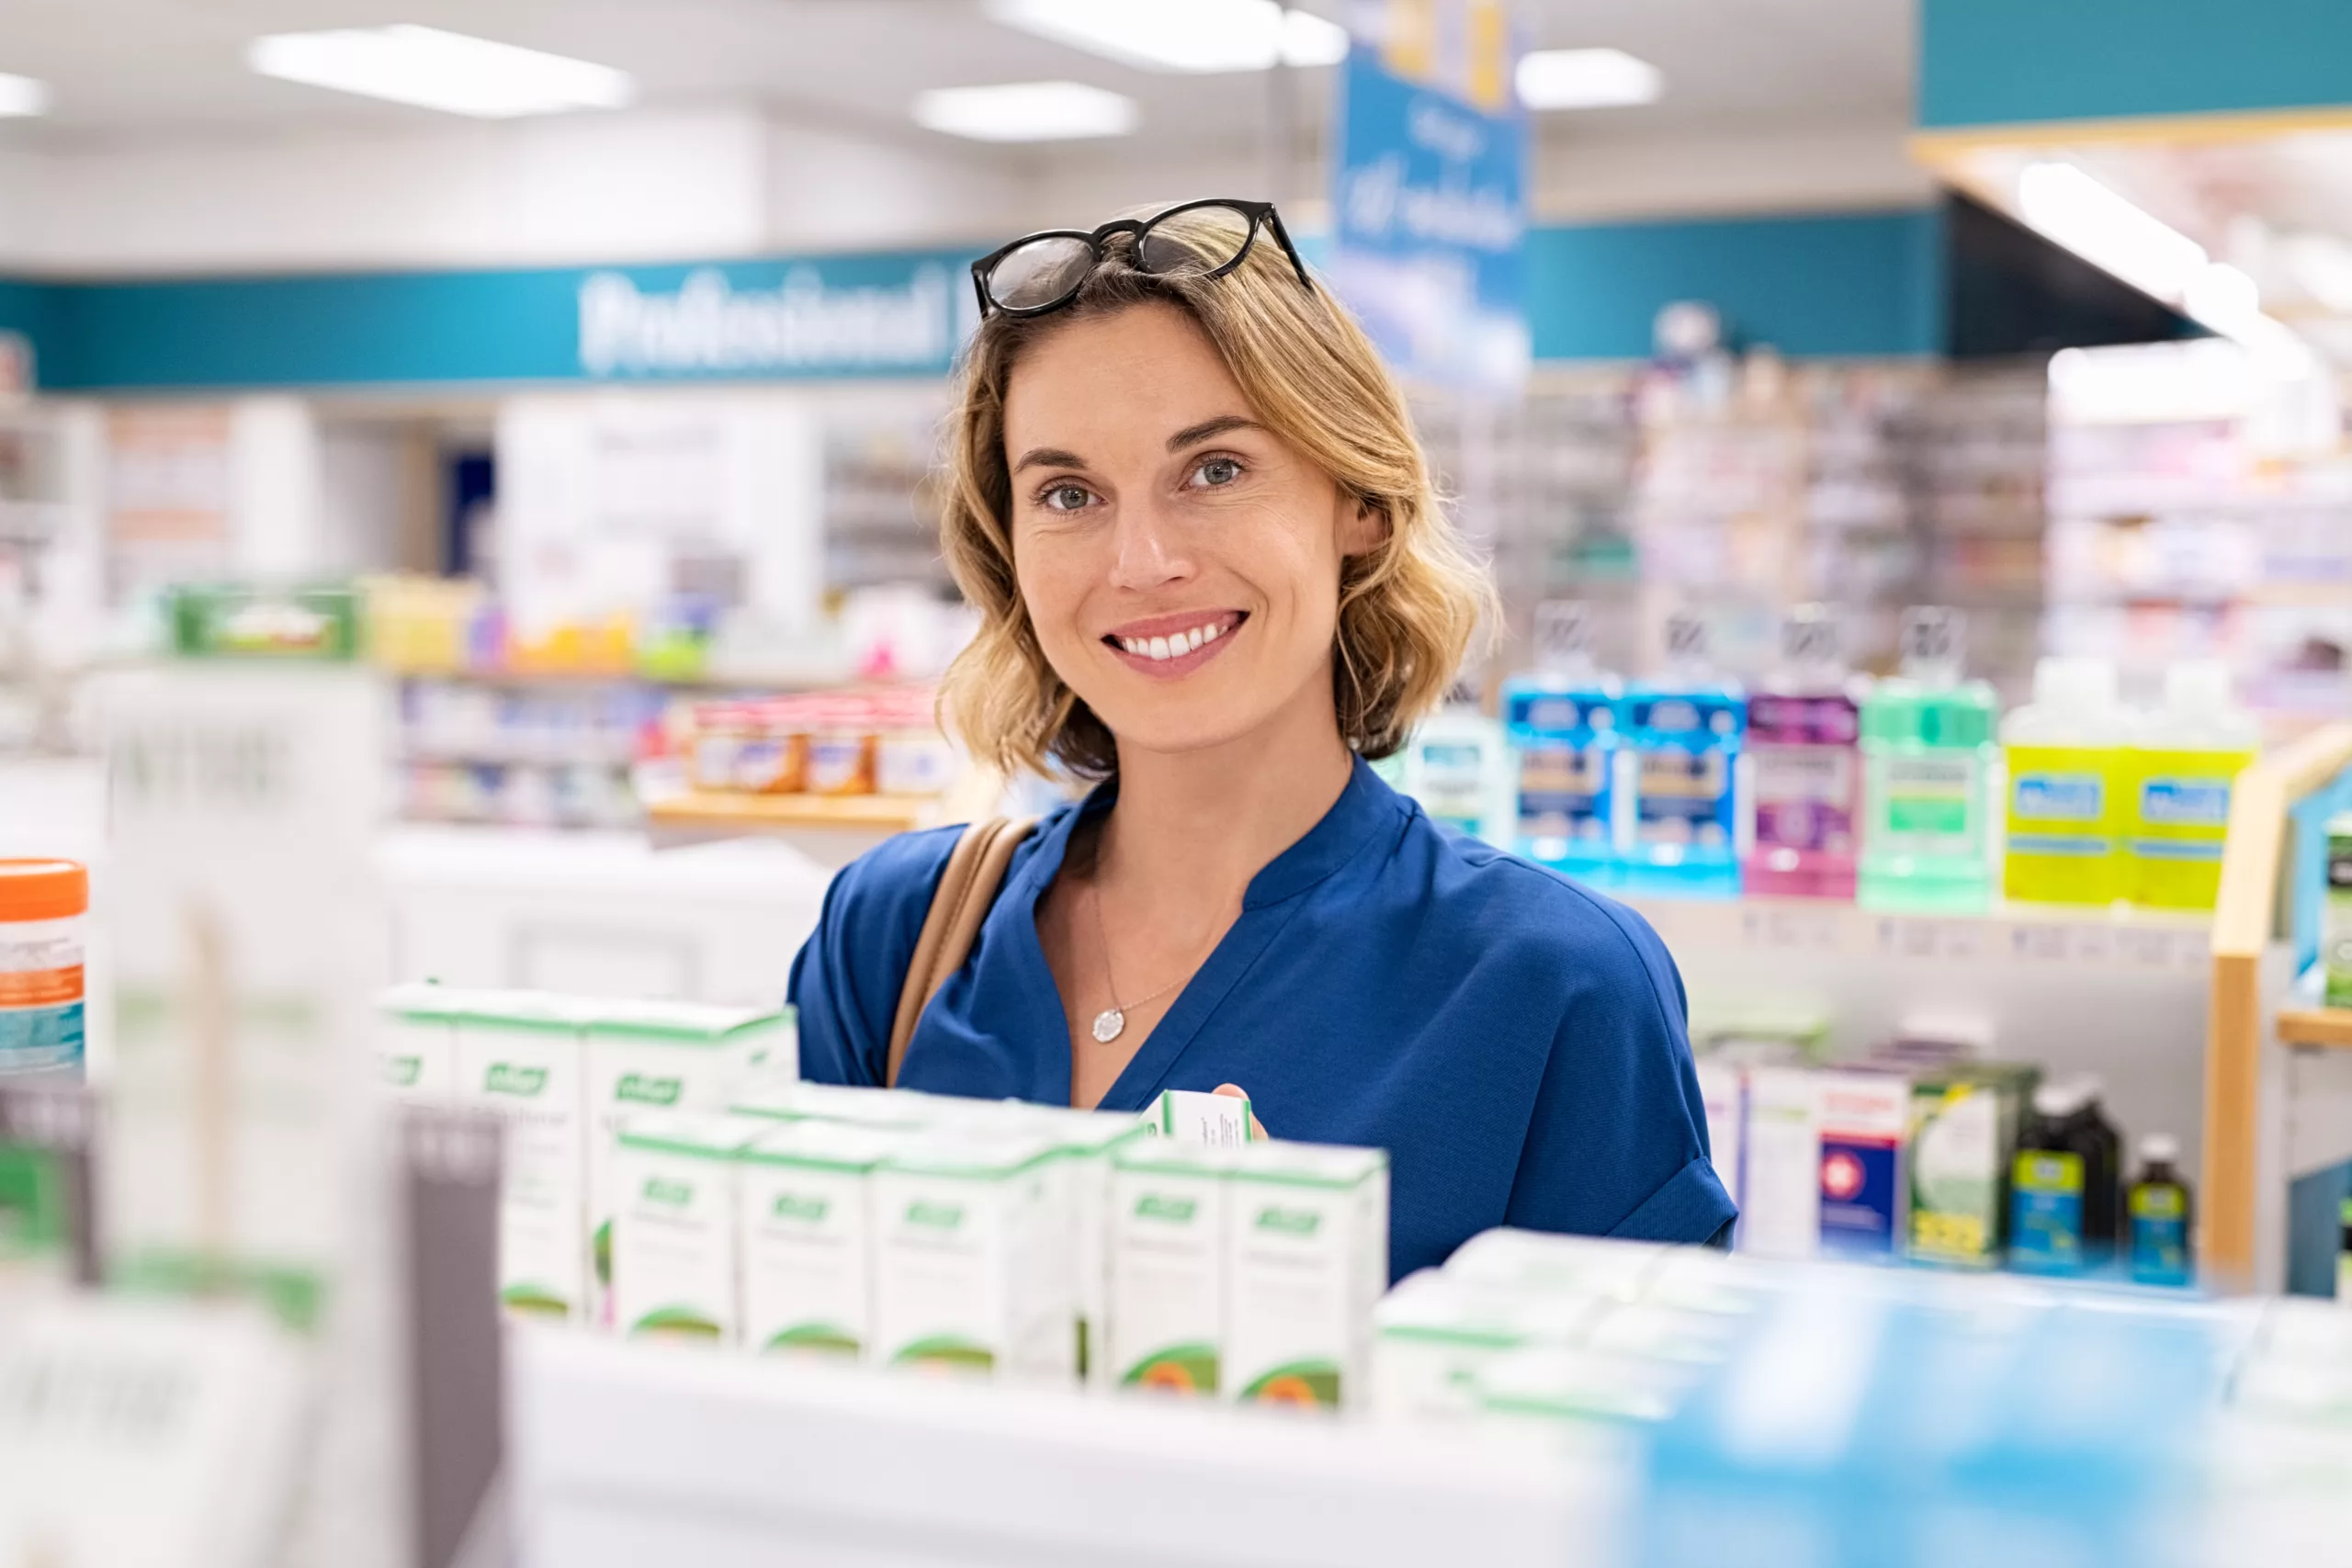 Portrait of smiling woman choosing dietary supplement at pharmacy in shopping mall. Happy mature woman customer buying lotion in skincare section of chemist’s. Woman checking medicine and drugs in shelf at drugstore while looking at camera.